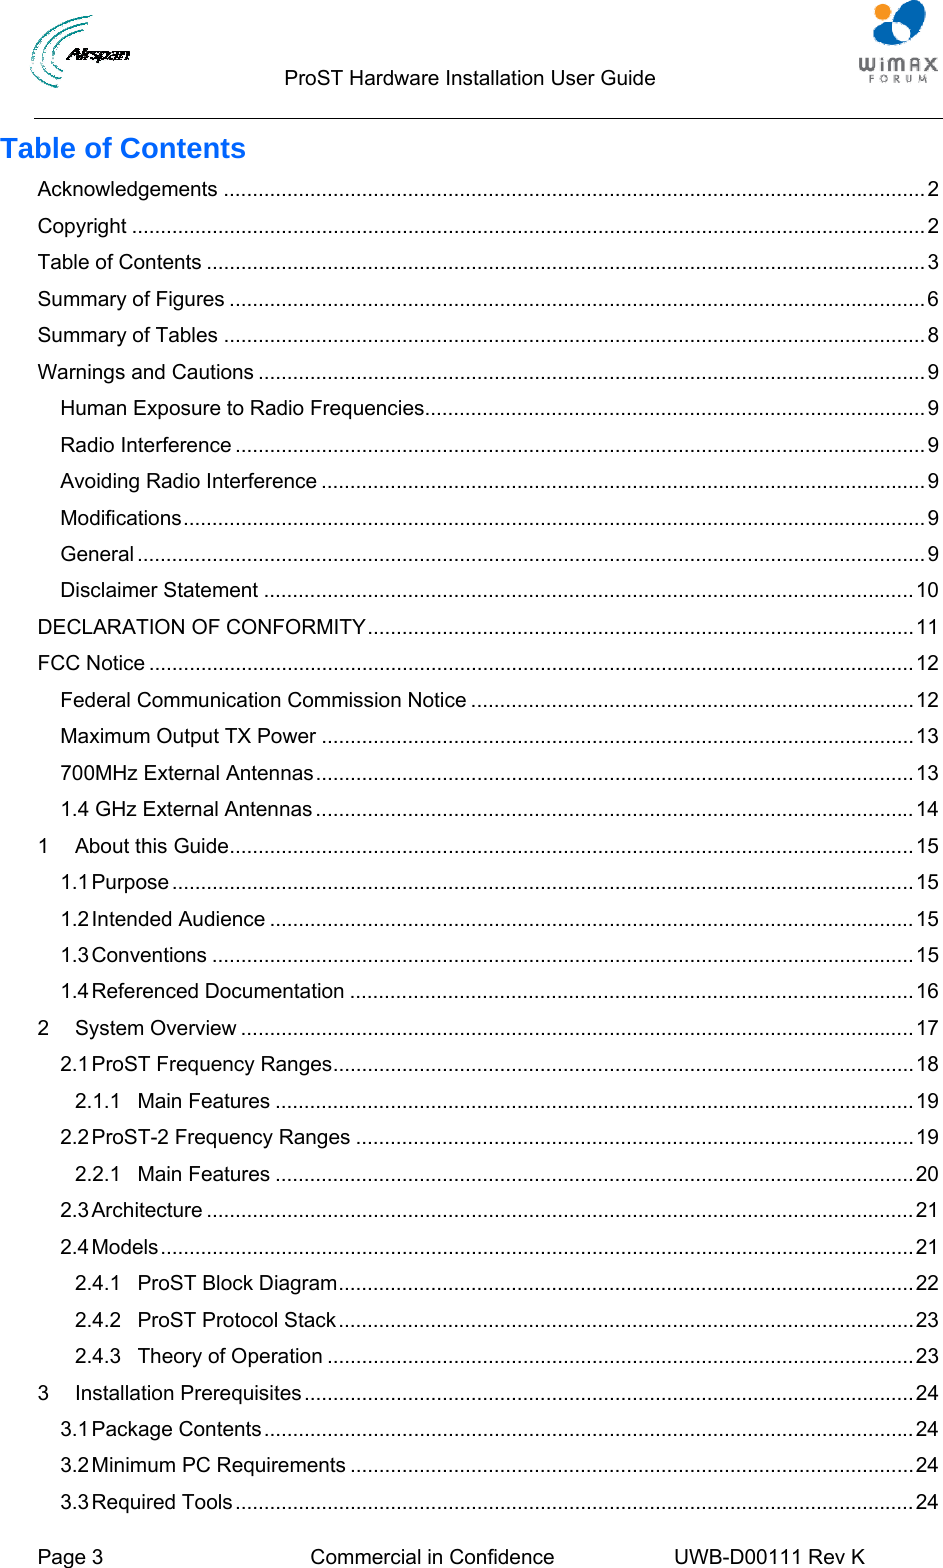                                  ProST Hardware Installation User Guide     Page 3  Commercial in Confidence  UWB-D00111 Rev K   Table of Contents Acknowledgements ..........................................................................................................................2 Copyright ..........................................................................................................................................2 Table of Contents .............................................................................................................................3 Summary of Figures .........................................................................................................................6 Summary of Tables ..........................................................................................................................8 Warnings and Cautions ....................................................................................................................9 Human Exposure to Radio Frequencies.......................................................................................9 Radio Interference ........................................................................................................................9 Avoiding Radio Interference .........................................................................................................9 Modifications.................................................................................................................................9 General .........................................................................................................................................9 Disclaimer Statement .................................................................................................................10 DECLARATION OF CONFORMITY...............................................................................................11 FCC Notice .....................................................................................................................................12 Federal Communication Commission Notice .............................................................................12 Maximum Output TX Power .......................................................................................................13 700MHz External Antennas........................................................................................................13 1.4 GHz External Antennas ........................................................................................................14 1 About this Guide.......................................................................................................................15 1.1 Purpose .................................................................................................................................15 1.2 Intended Audience ................................................................................................................15 1.3 Conventions ..........................................................................................................................15 1.4 Referenced Documentation ..................................................................................................16 2 System Overview .....................................................................................................................17 2.1 ProST Frequency Ranges.....................................................................................................18 2.1.1 Main Features ...............................................................................................................19 2.2 ProST-2 Frequency Ranges .................................................................................................19 2.2.1 Main Features ...............................................................................................................20 2.3 Architecture ...........................................................................................................................21 2.4 Models...................................................................................................................................21 2.4.1 ProST Block Diagram....................................................................................................22 2.4.2 ProST Protocol Stack....................................................................................................23 2.4.3 Theory of Operation ......................................................................................................23 3 Installation Prerequisites..........................................................................................................24 3.1 Package Contents.................................................................................................................24 3.2 Minimum PC Requirements ..................................................................................................24 3.3 Required Tools......................................................................................................................24 